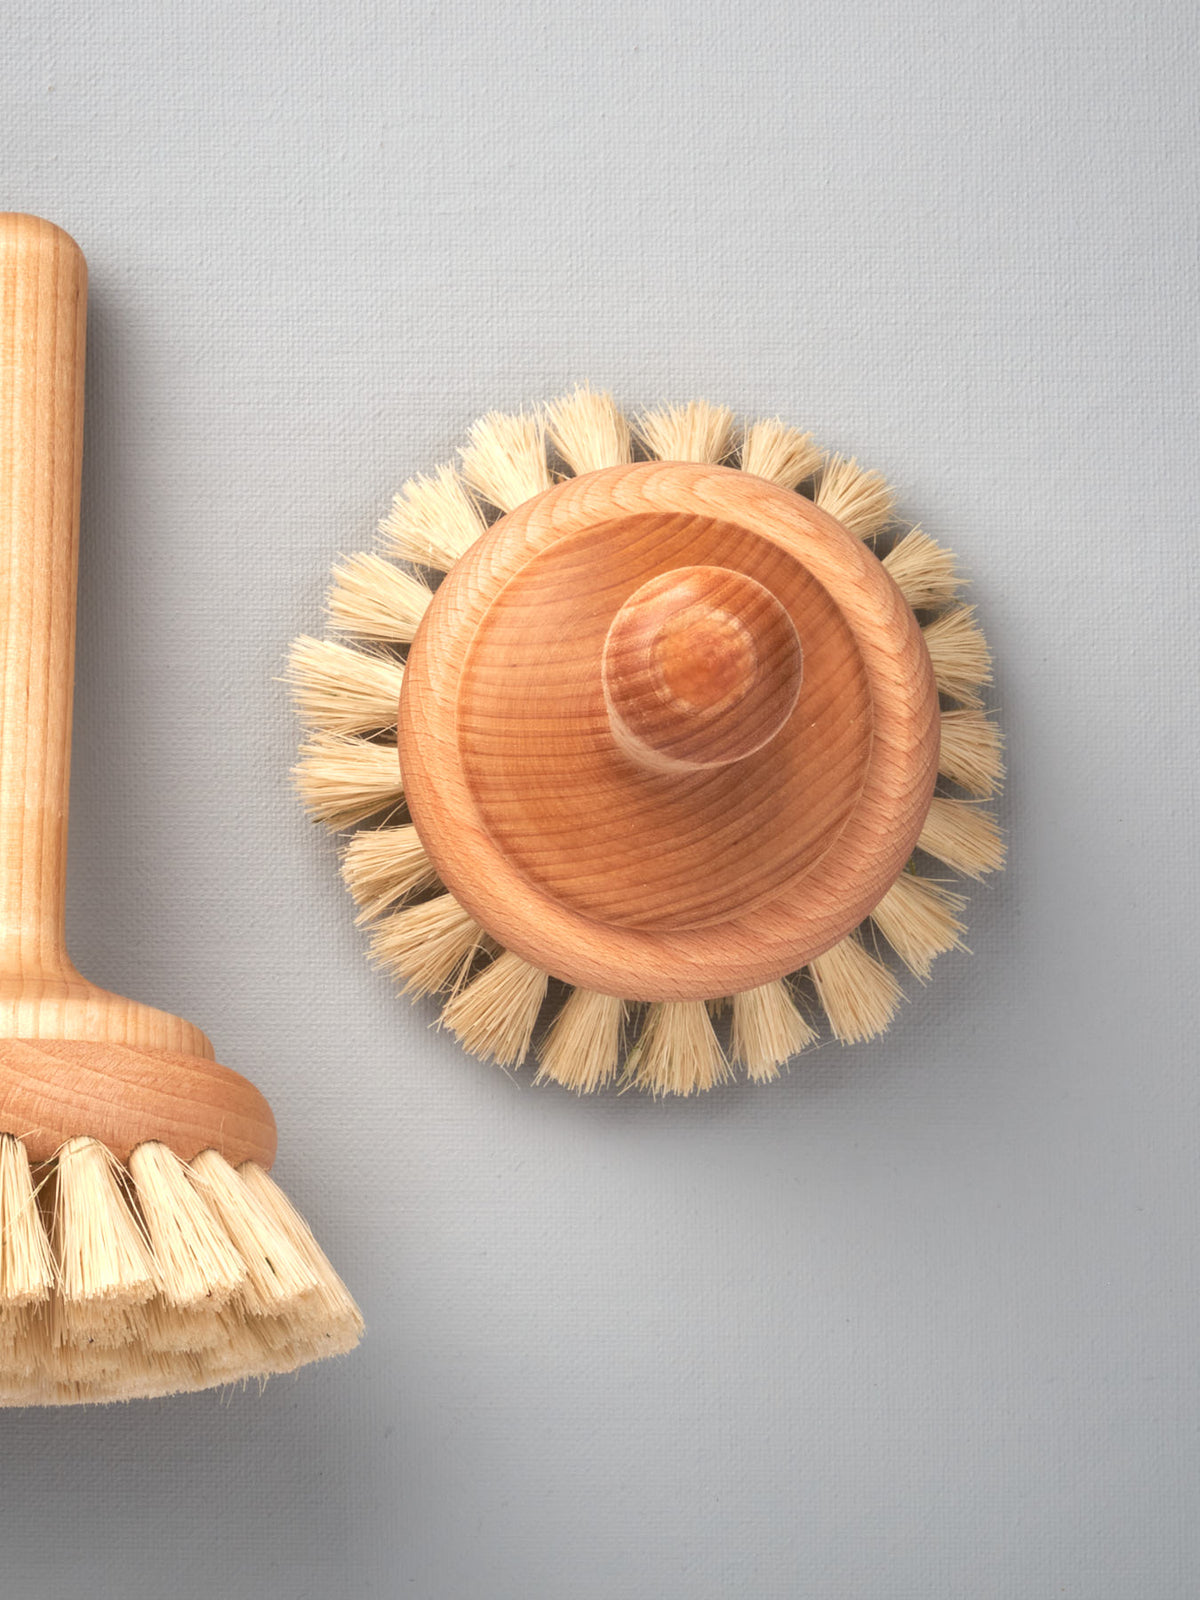 Two Iris Hantverk bathroom cleaning brushes on a gray background.